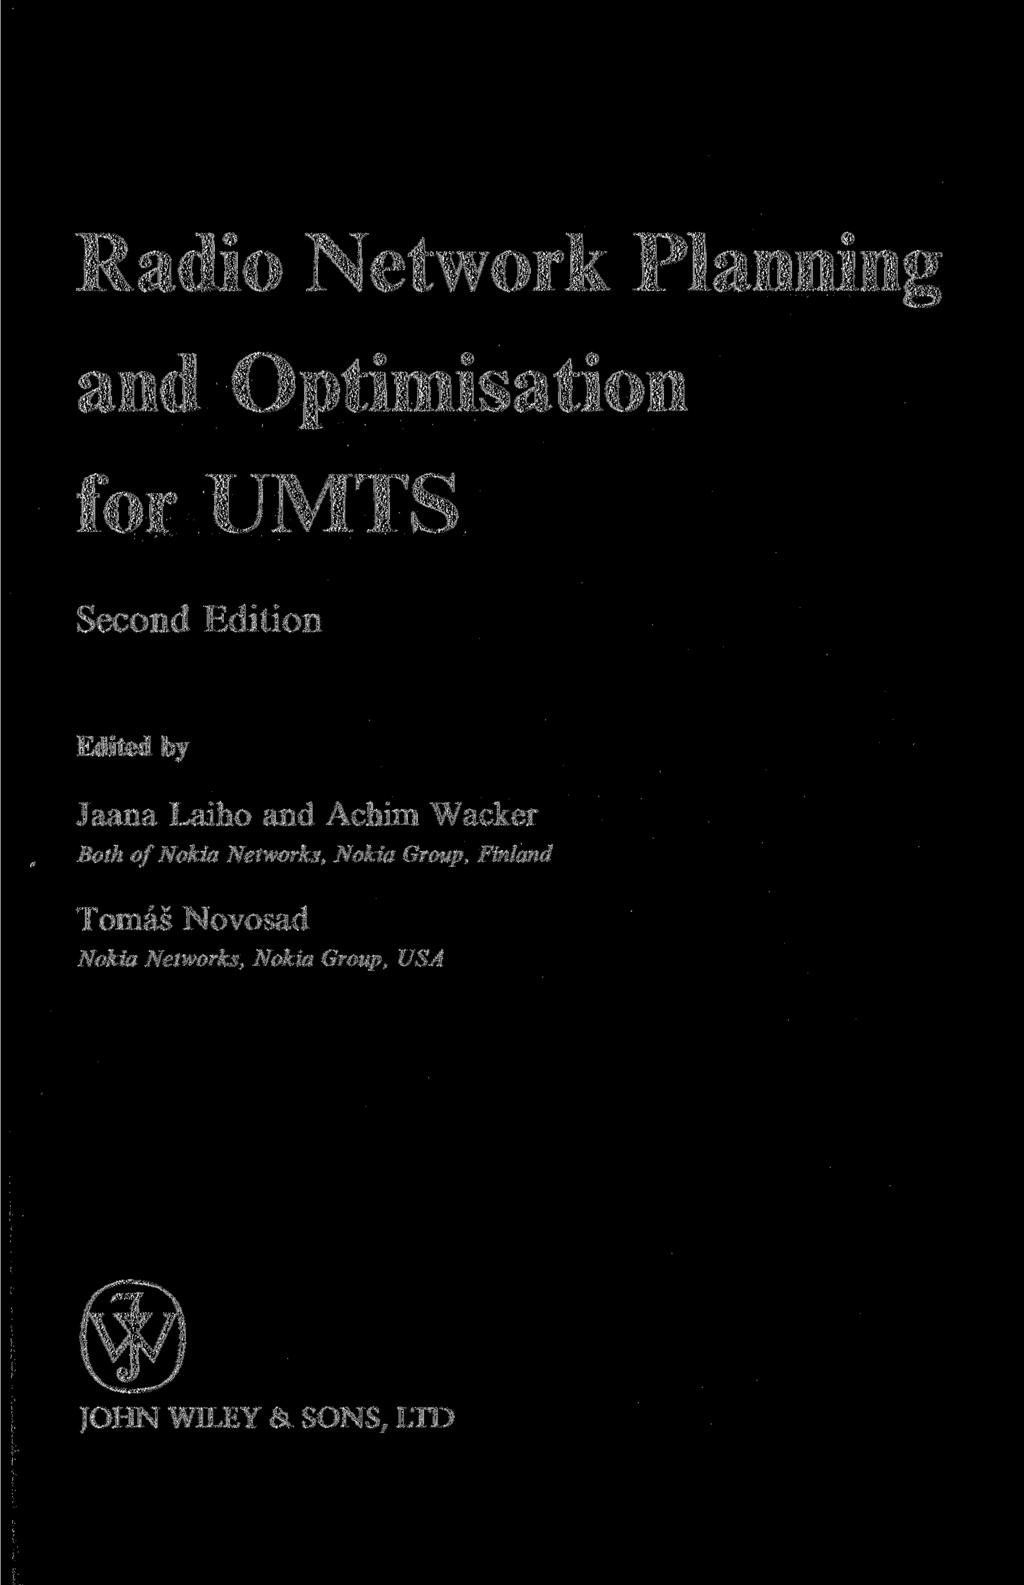 Radio Network Planning and Optimisation for UMTS Second Edition Edited by Jaana Laiho and Achim Wacker Both